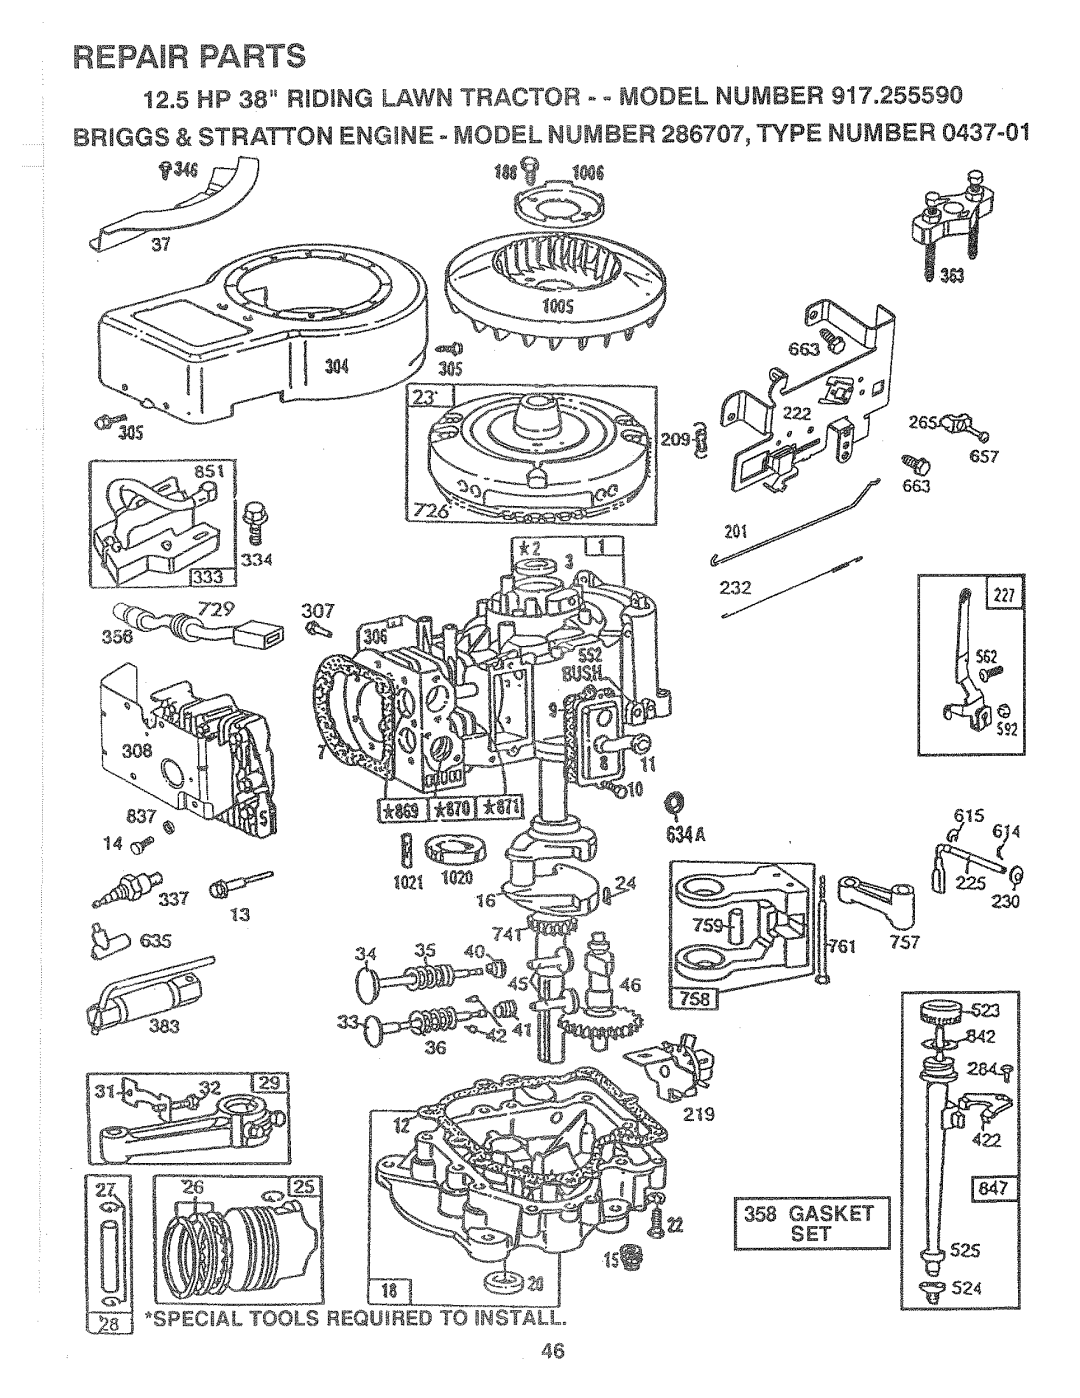 Sears 917.25559 manual Gasketset, SPECIAL TOOLS REQUIRED TO _NSTALLo, Y337, Repair Parts, _szs 